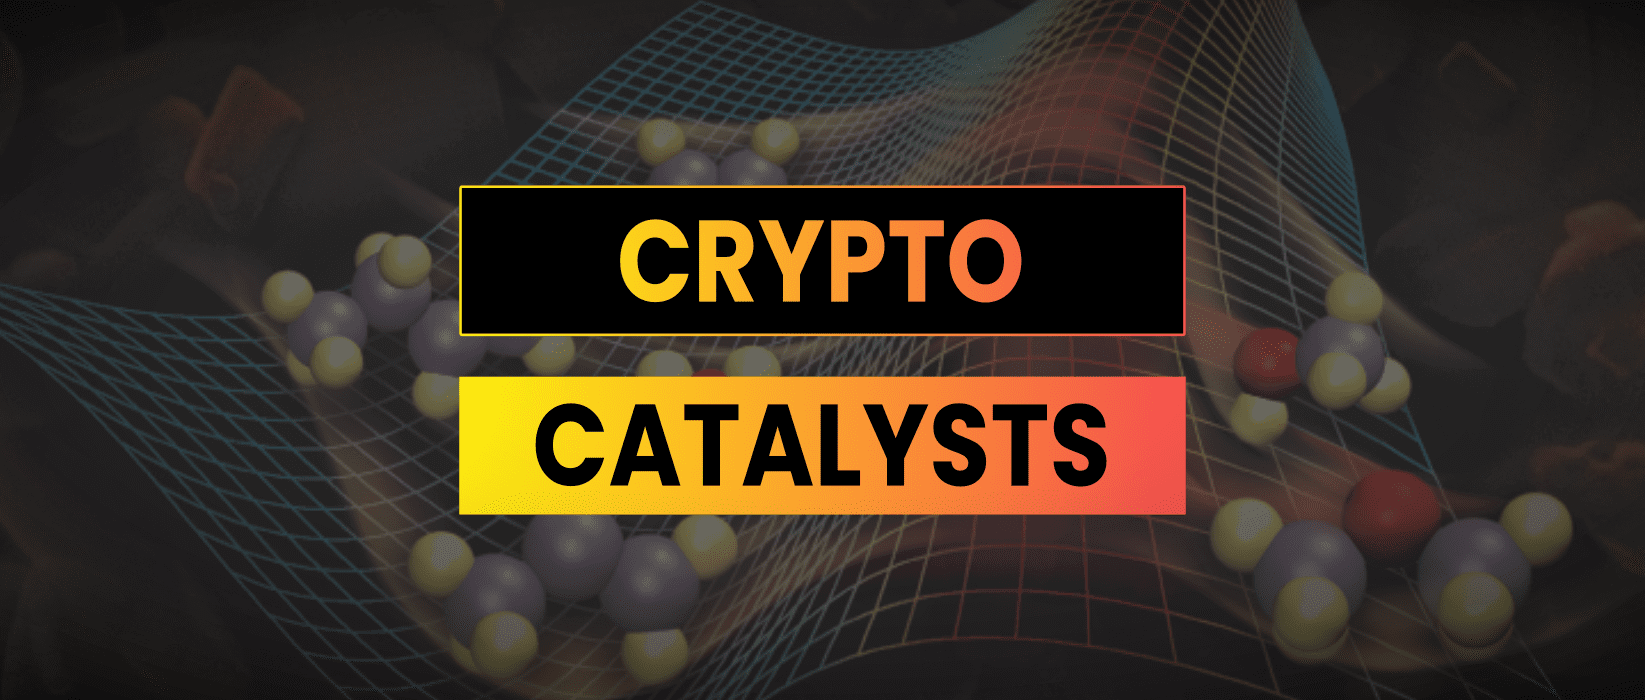 Frontrunning Crypto Catalysts For Fun & Profit